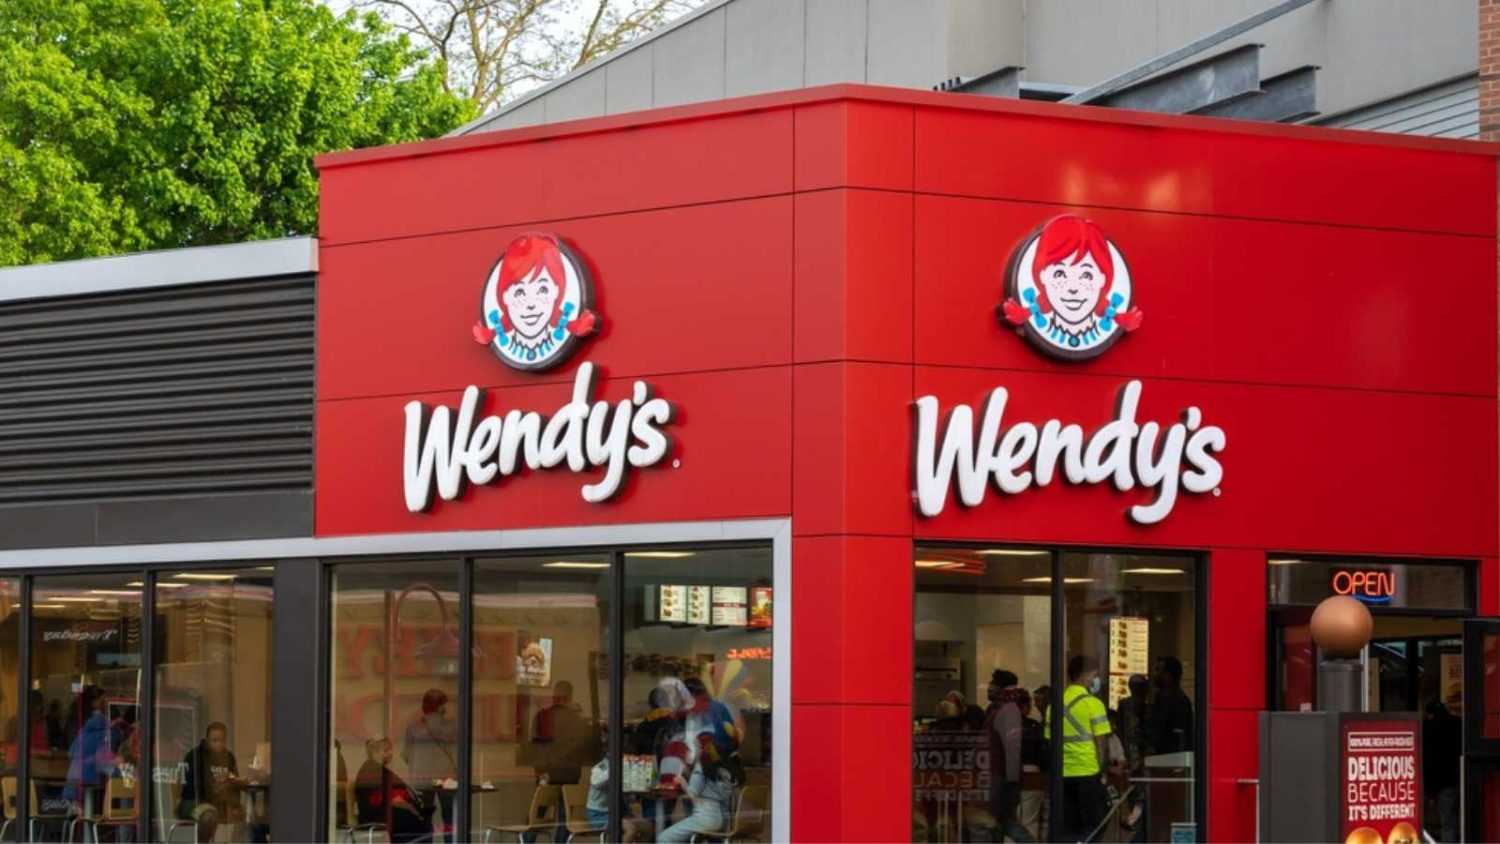 Niagara Falls, ON, Canada - May 23, 2022: A Wendy's restaurant in Niagara Falls, ON, Canada. The Wendy's Company is an American holding company for the major fast food chain Wendy's.